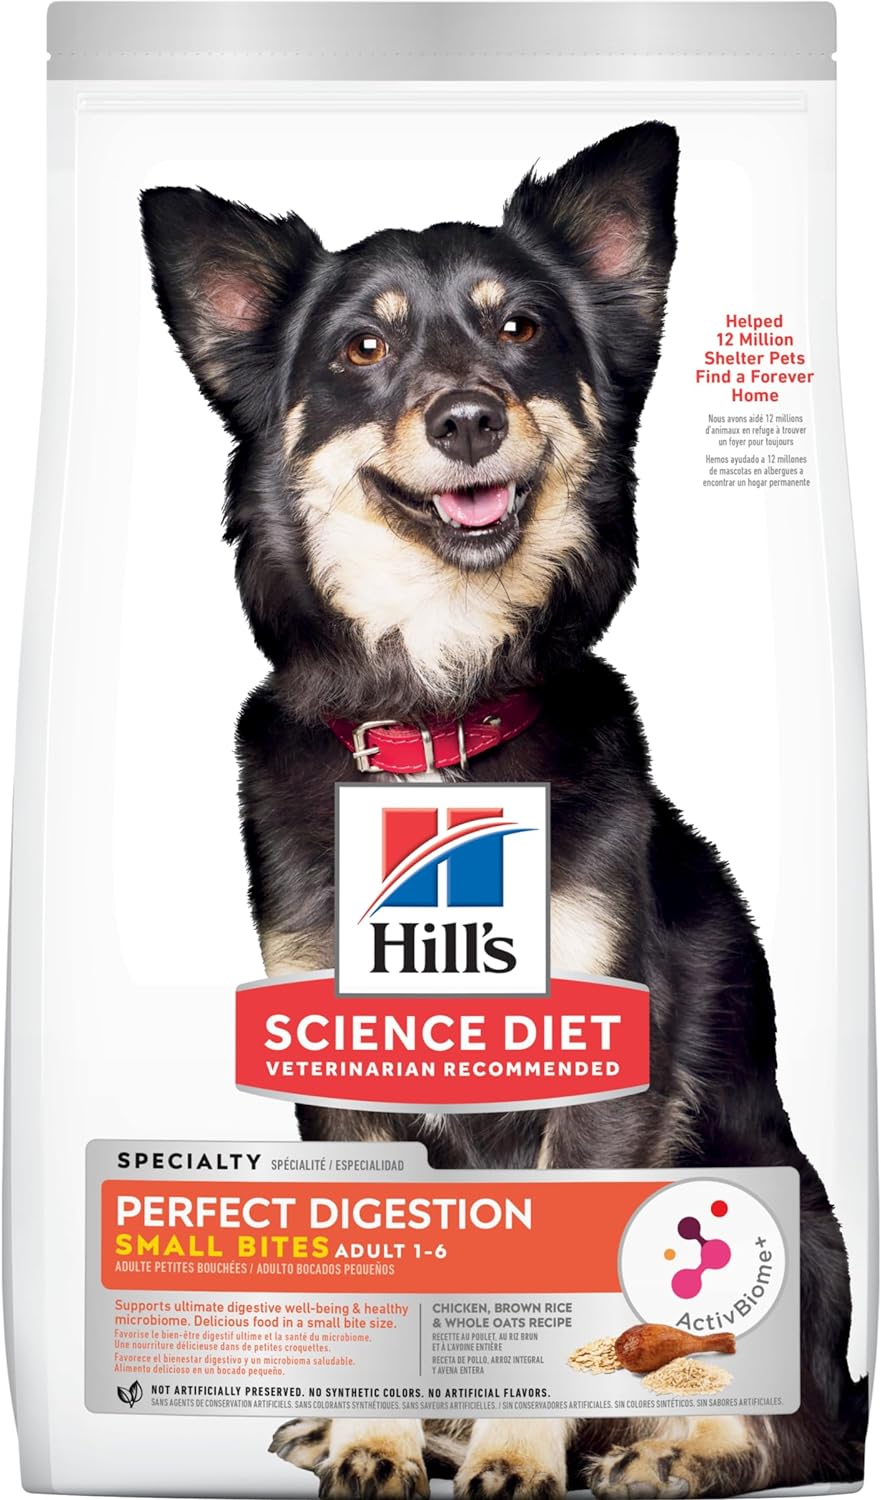 Hill’s Science Diet Perfect Digestion Small Bites Chicken, Brown Rice & Whole Oats Recipe Dry Dog Food – Gallery Image 1